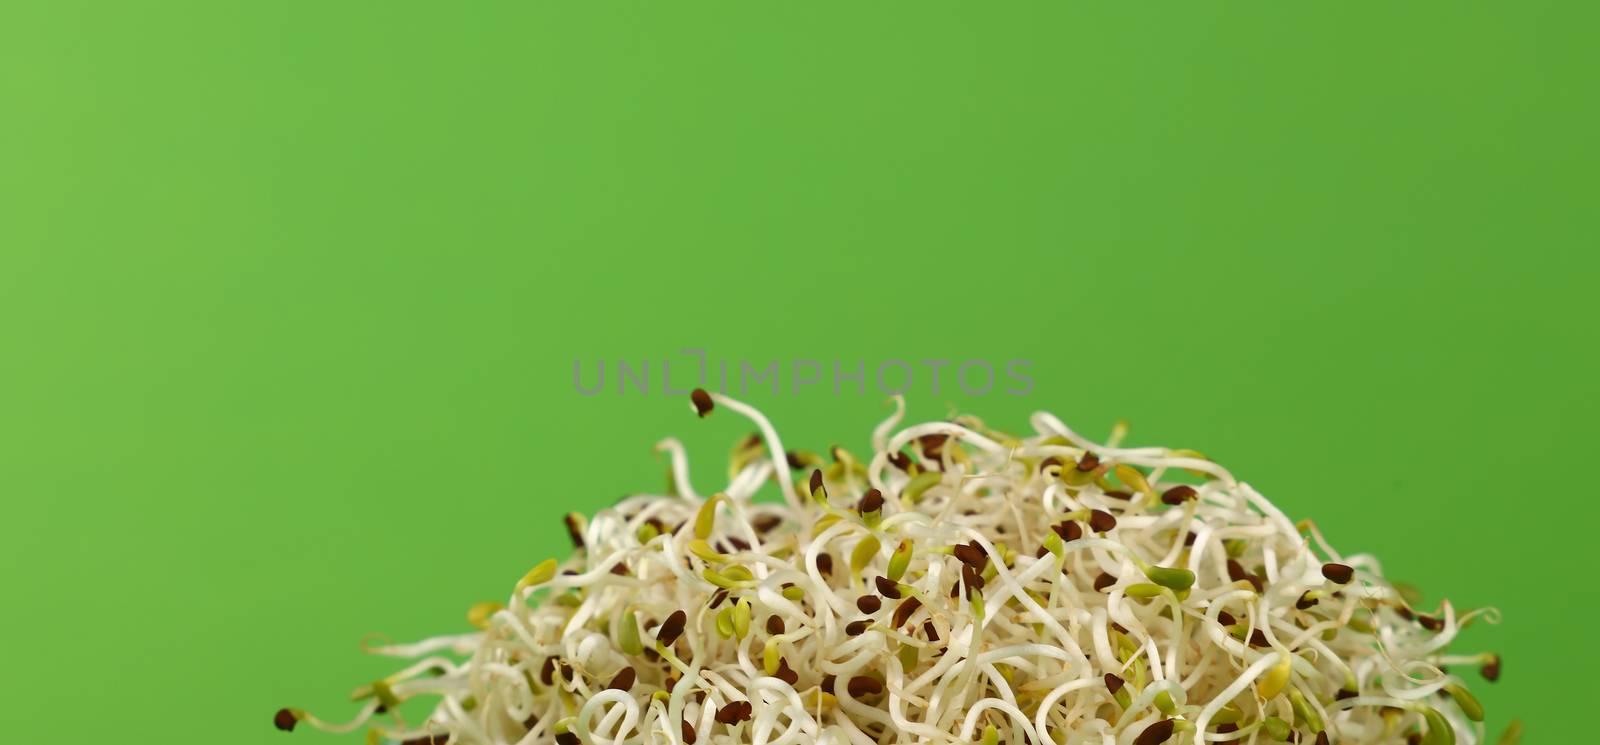 Heap of microgreen leaves, young vegetable sprouts, over green background, close up, low angle view